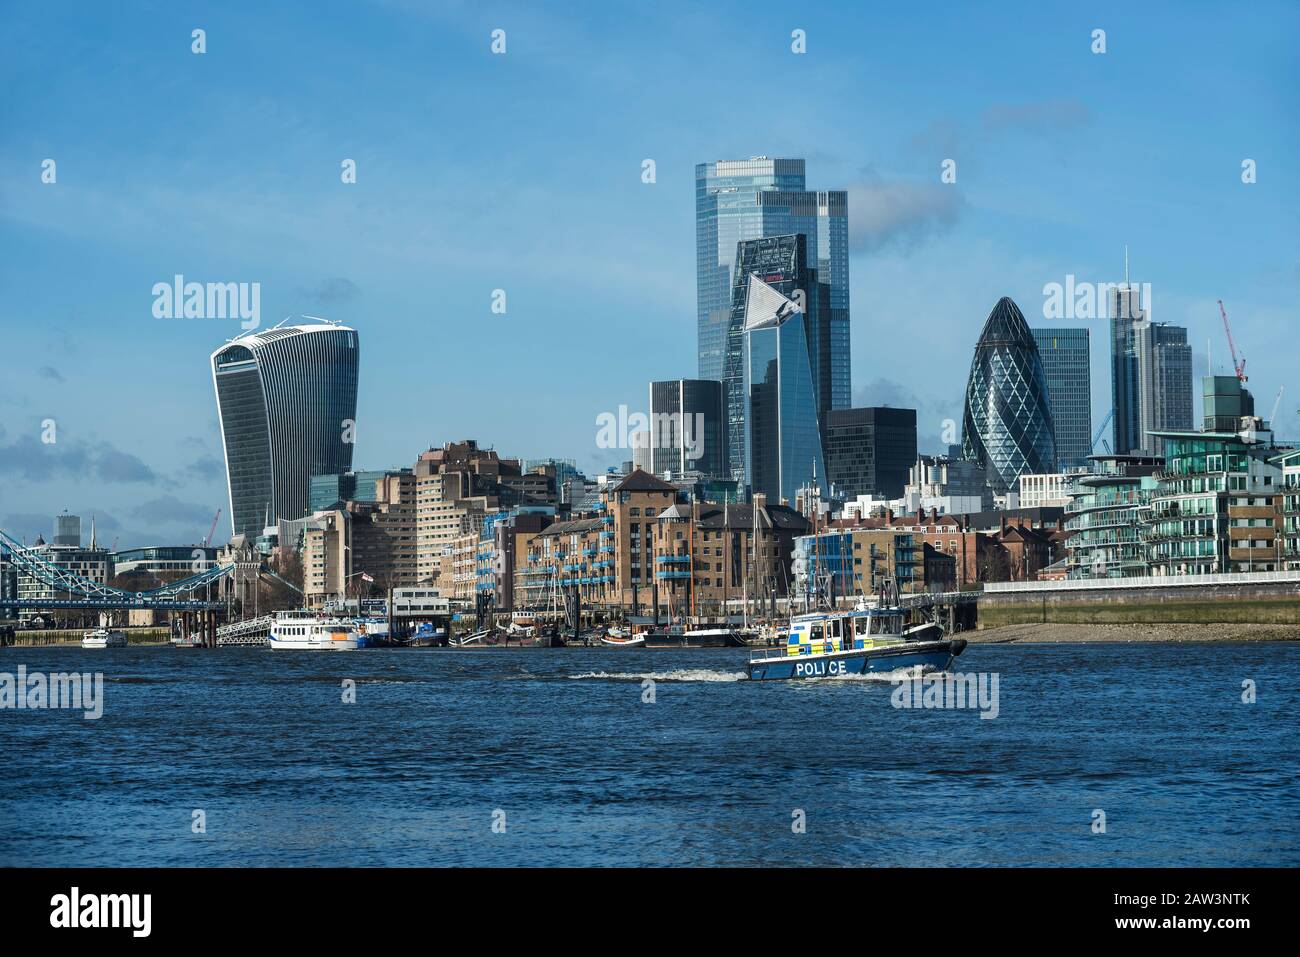 Cityscape of the the financial centre of The City of London from across The River Thames with a police launch heading downstream. Stock Photo